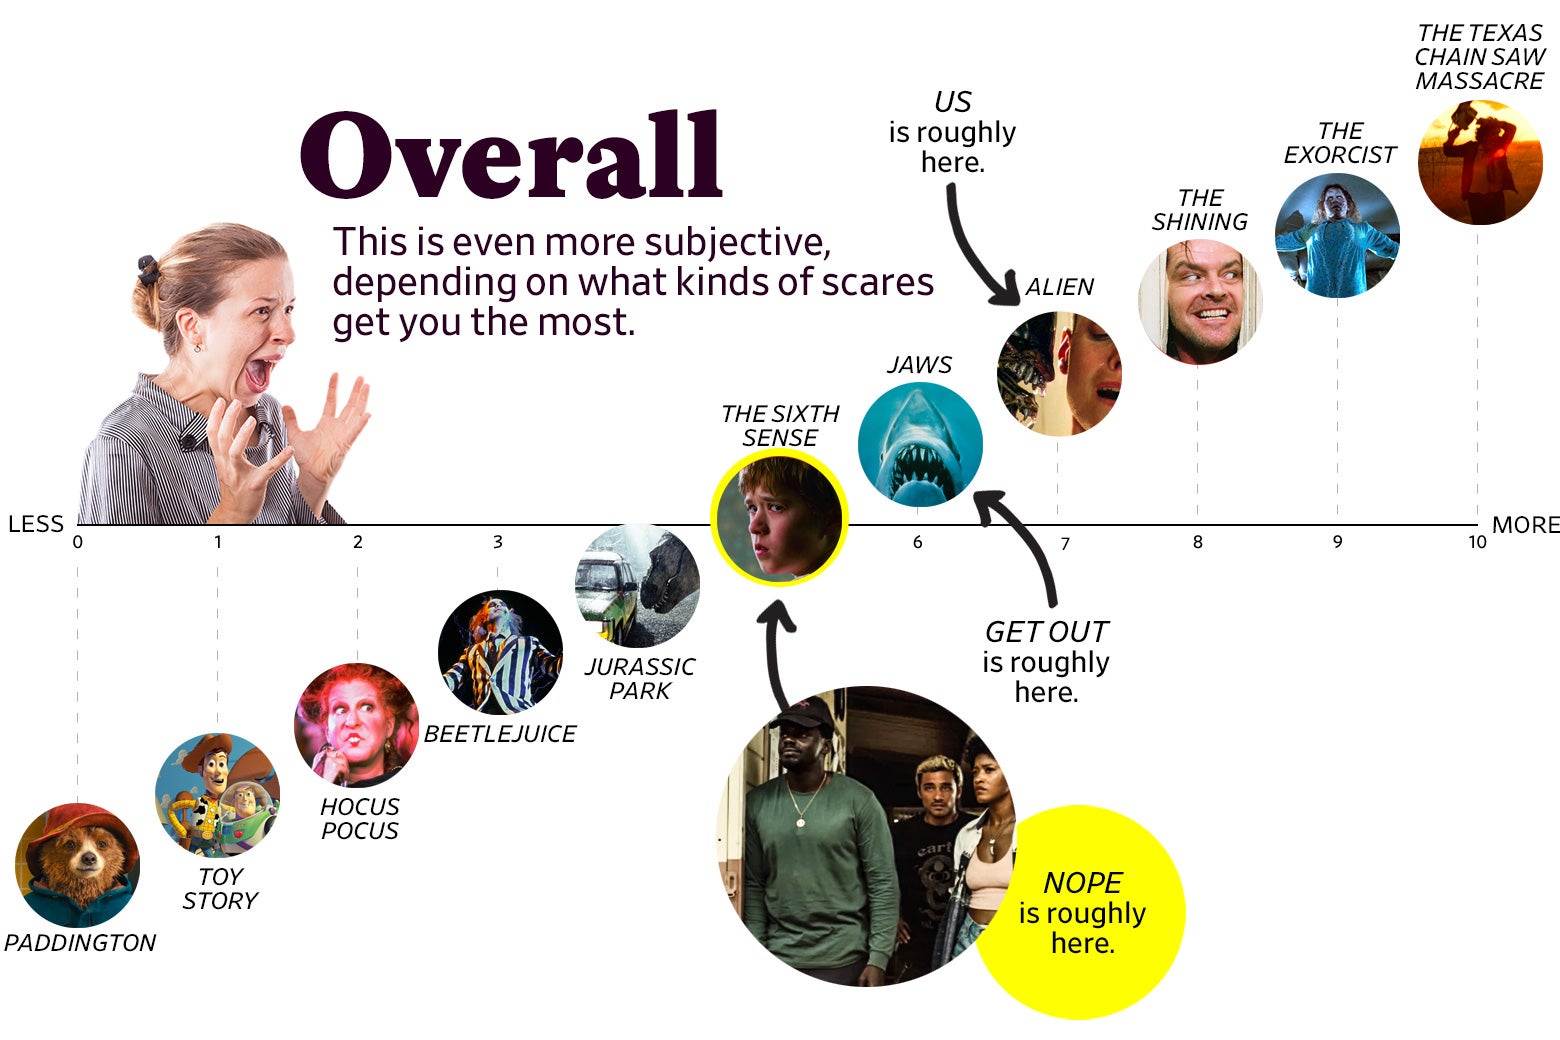 A chart titled “Overall: This is even more subjective, depending on what kinds of scares get you the most” shows that Nope ranks a 5 overall, roughly the same as The Sixth Sense, while Us ranked a 7, roughly the same as Alien, and Get Out ranked a 6, roughly the same as Jaws. The scale ranges from Paddington (0) to The Texas Chain Saw Massacre, 1974 (10).